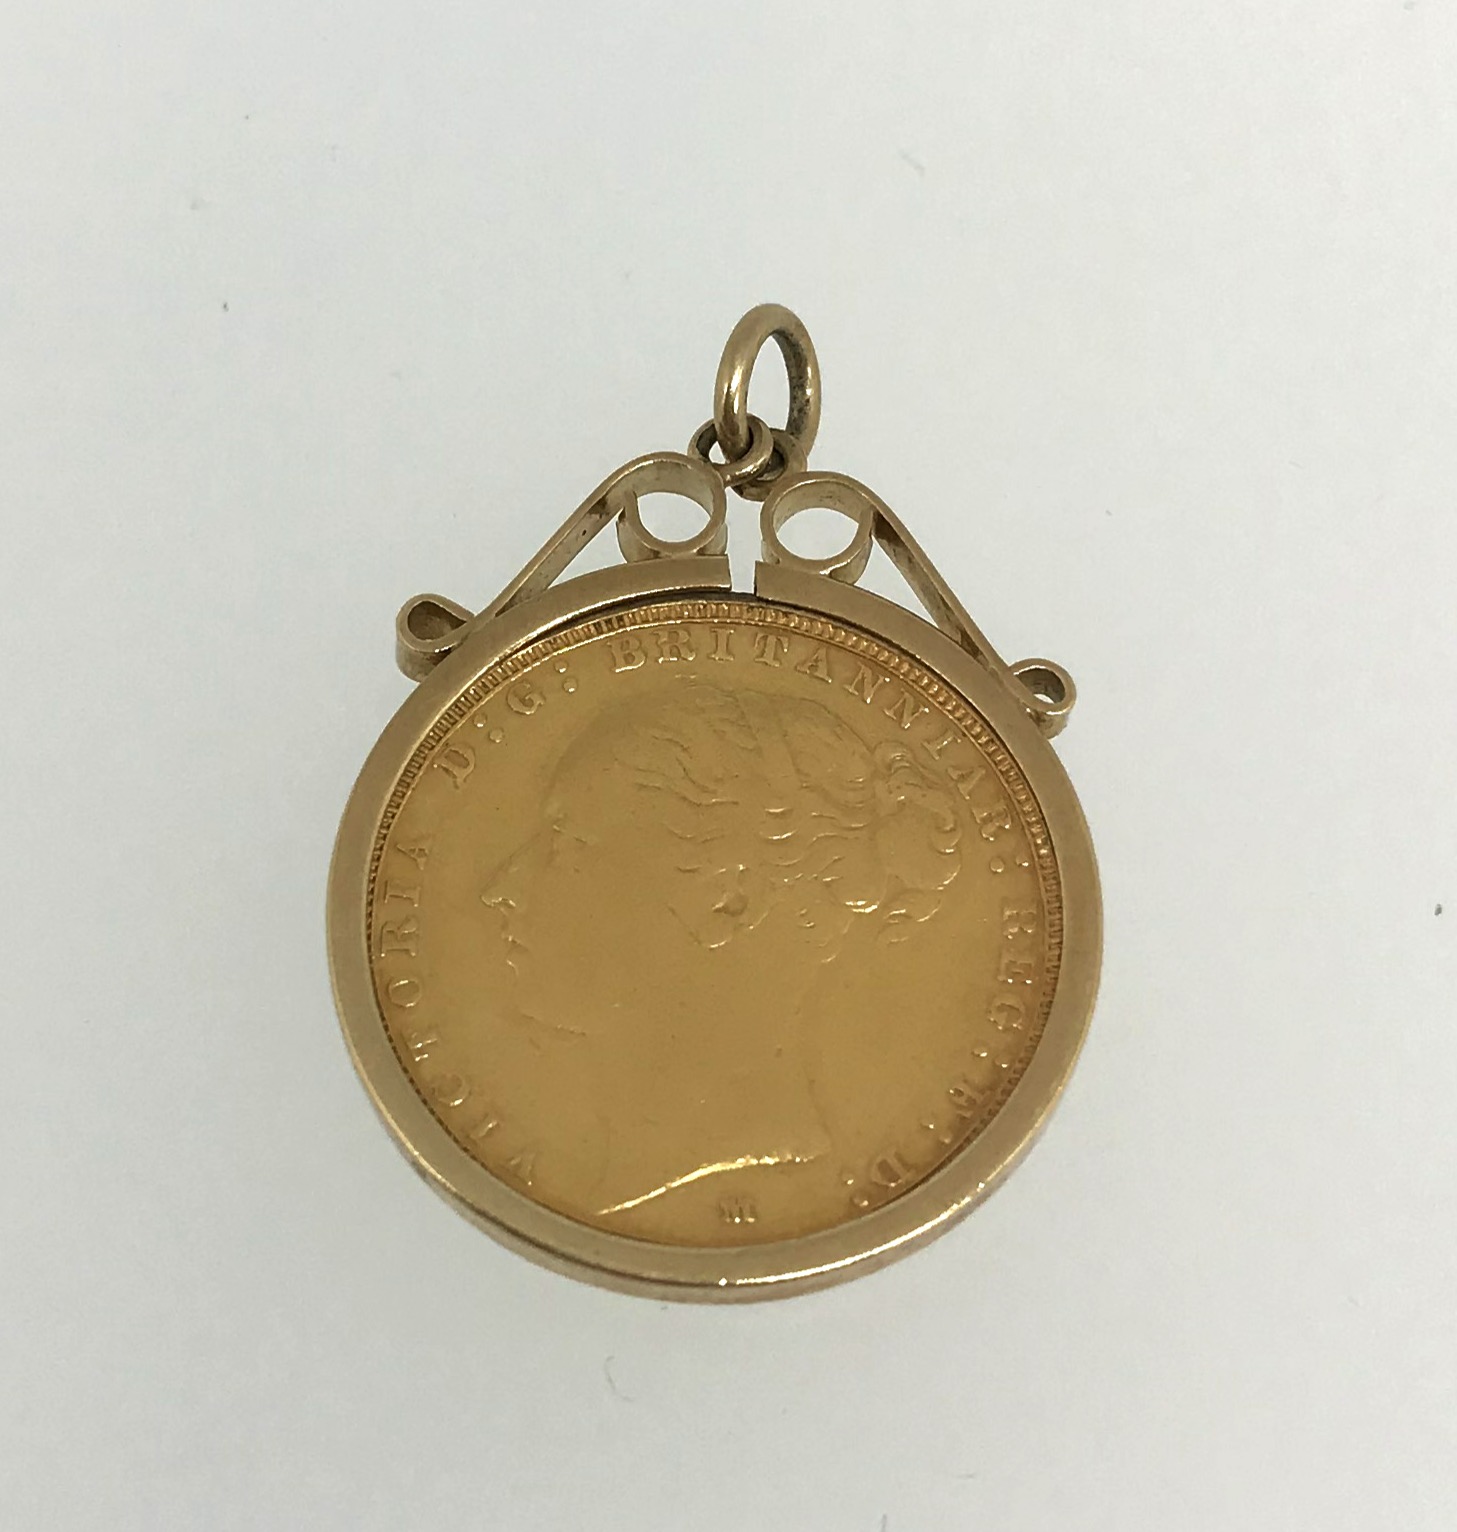 Victoria, 1886 sovereign, bunhead, M, mounted as a pendant, total weight 9.8gms.